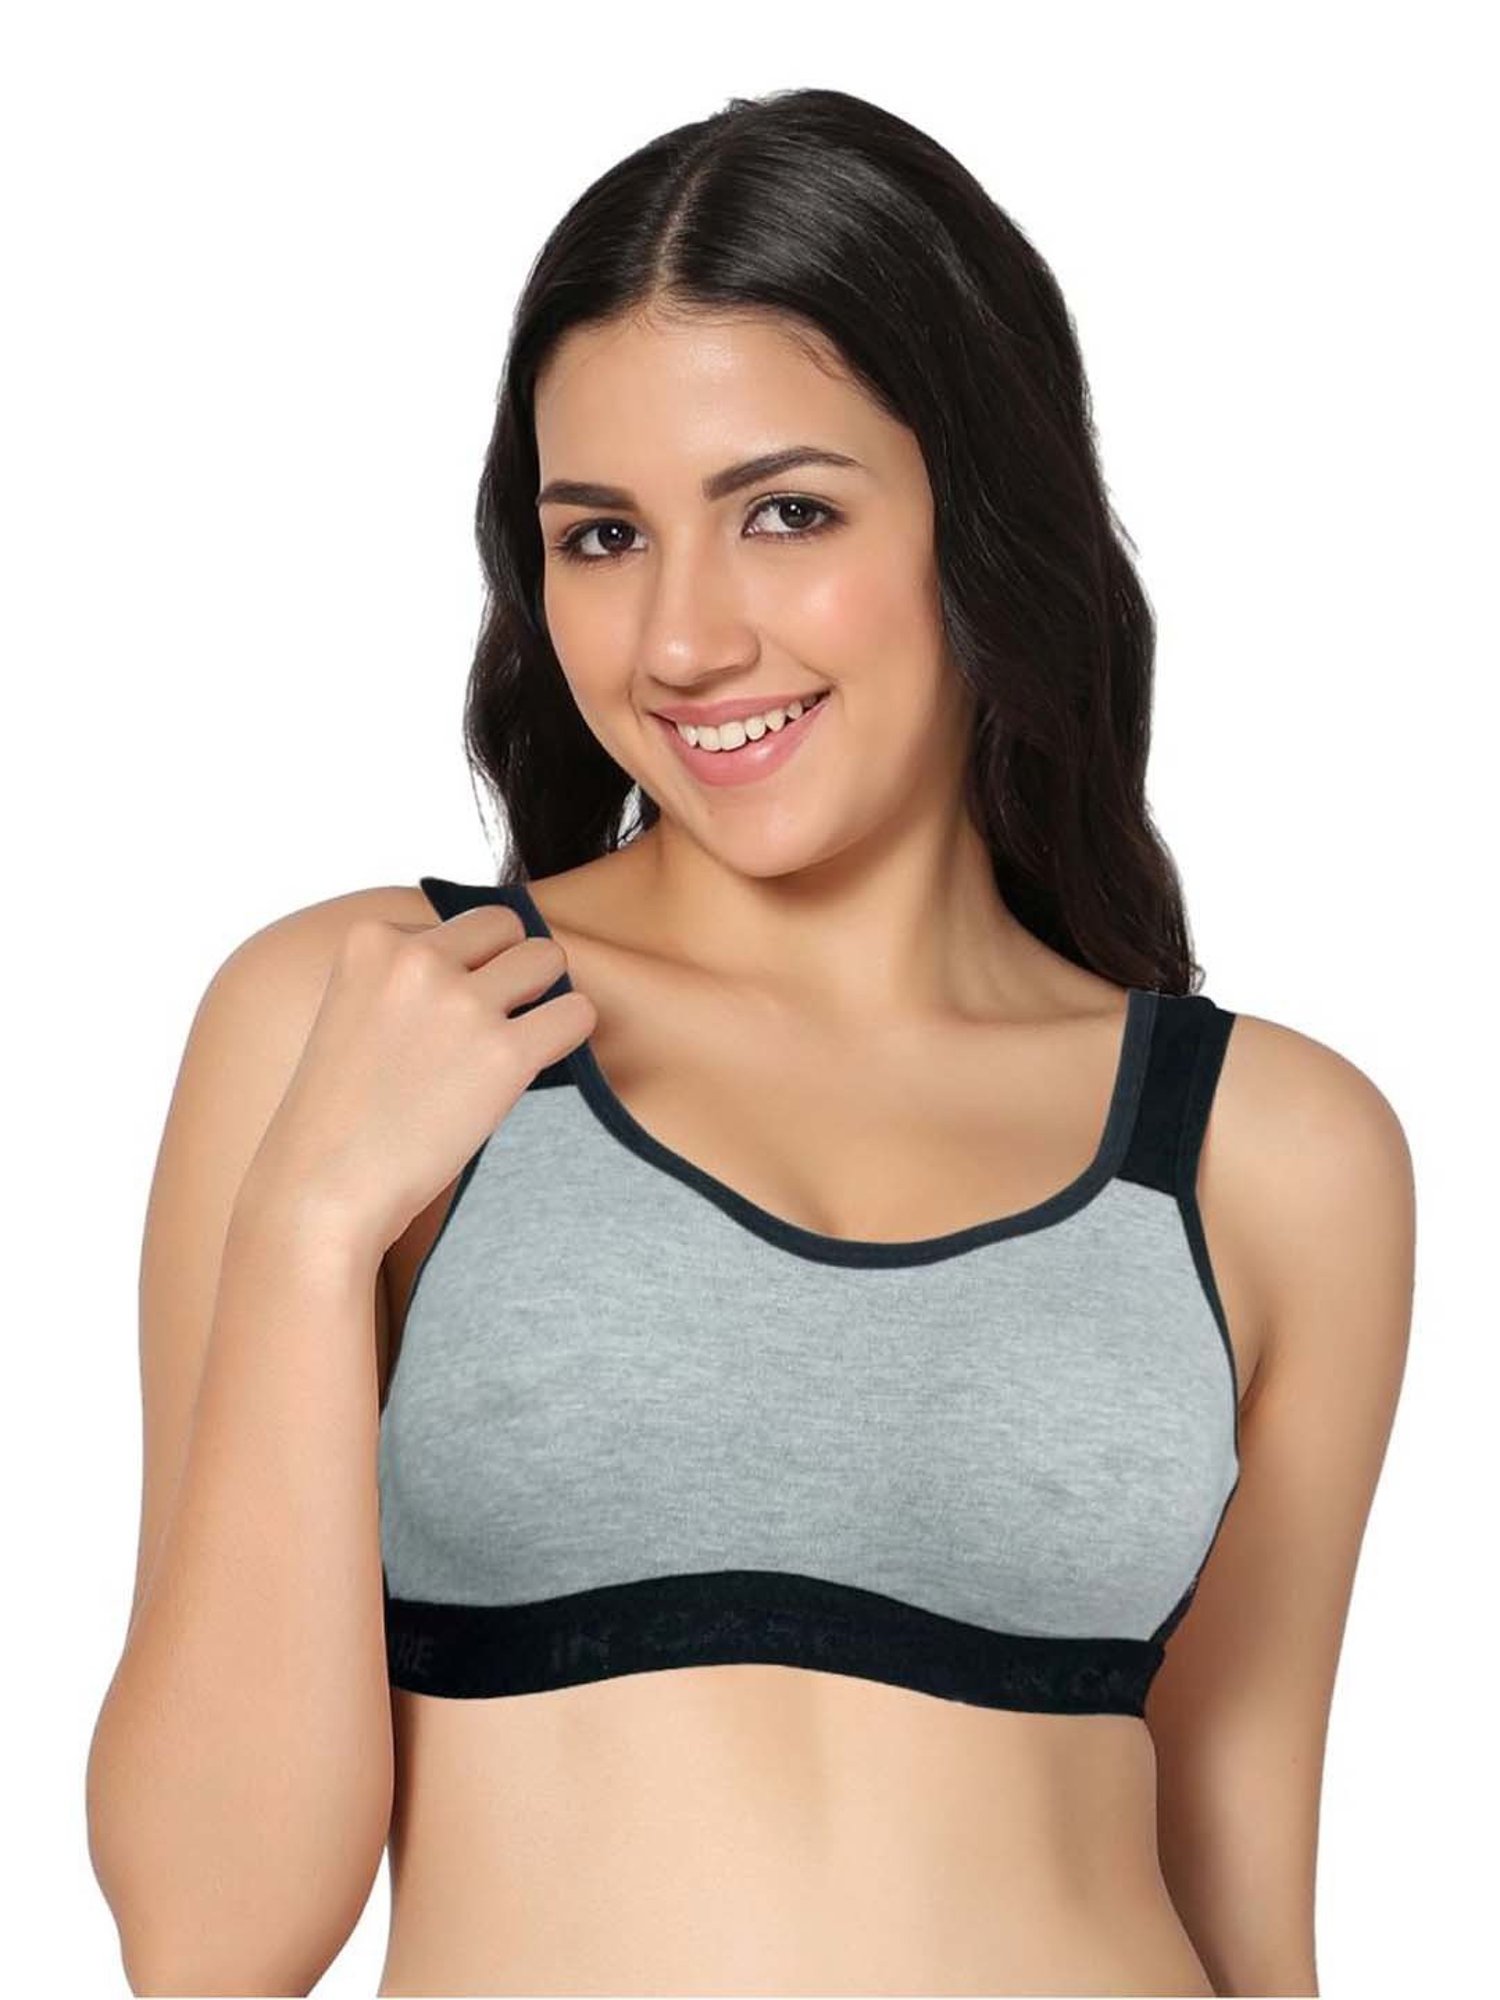 Hollister Gray / Black Sports Bra Size XS - $5 (83% Off Retail) - From  Andrea